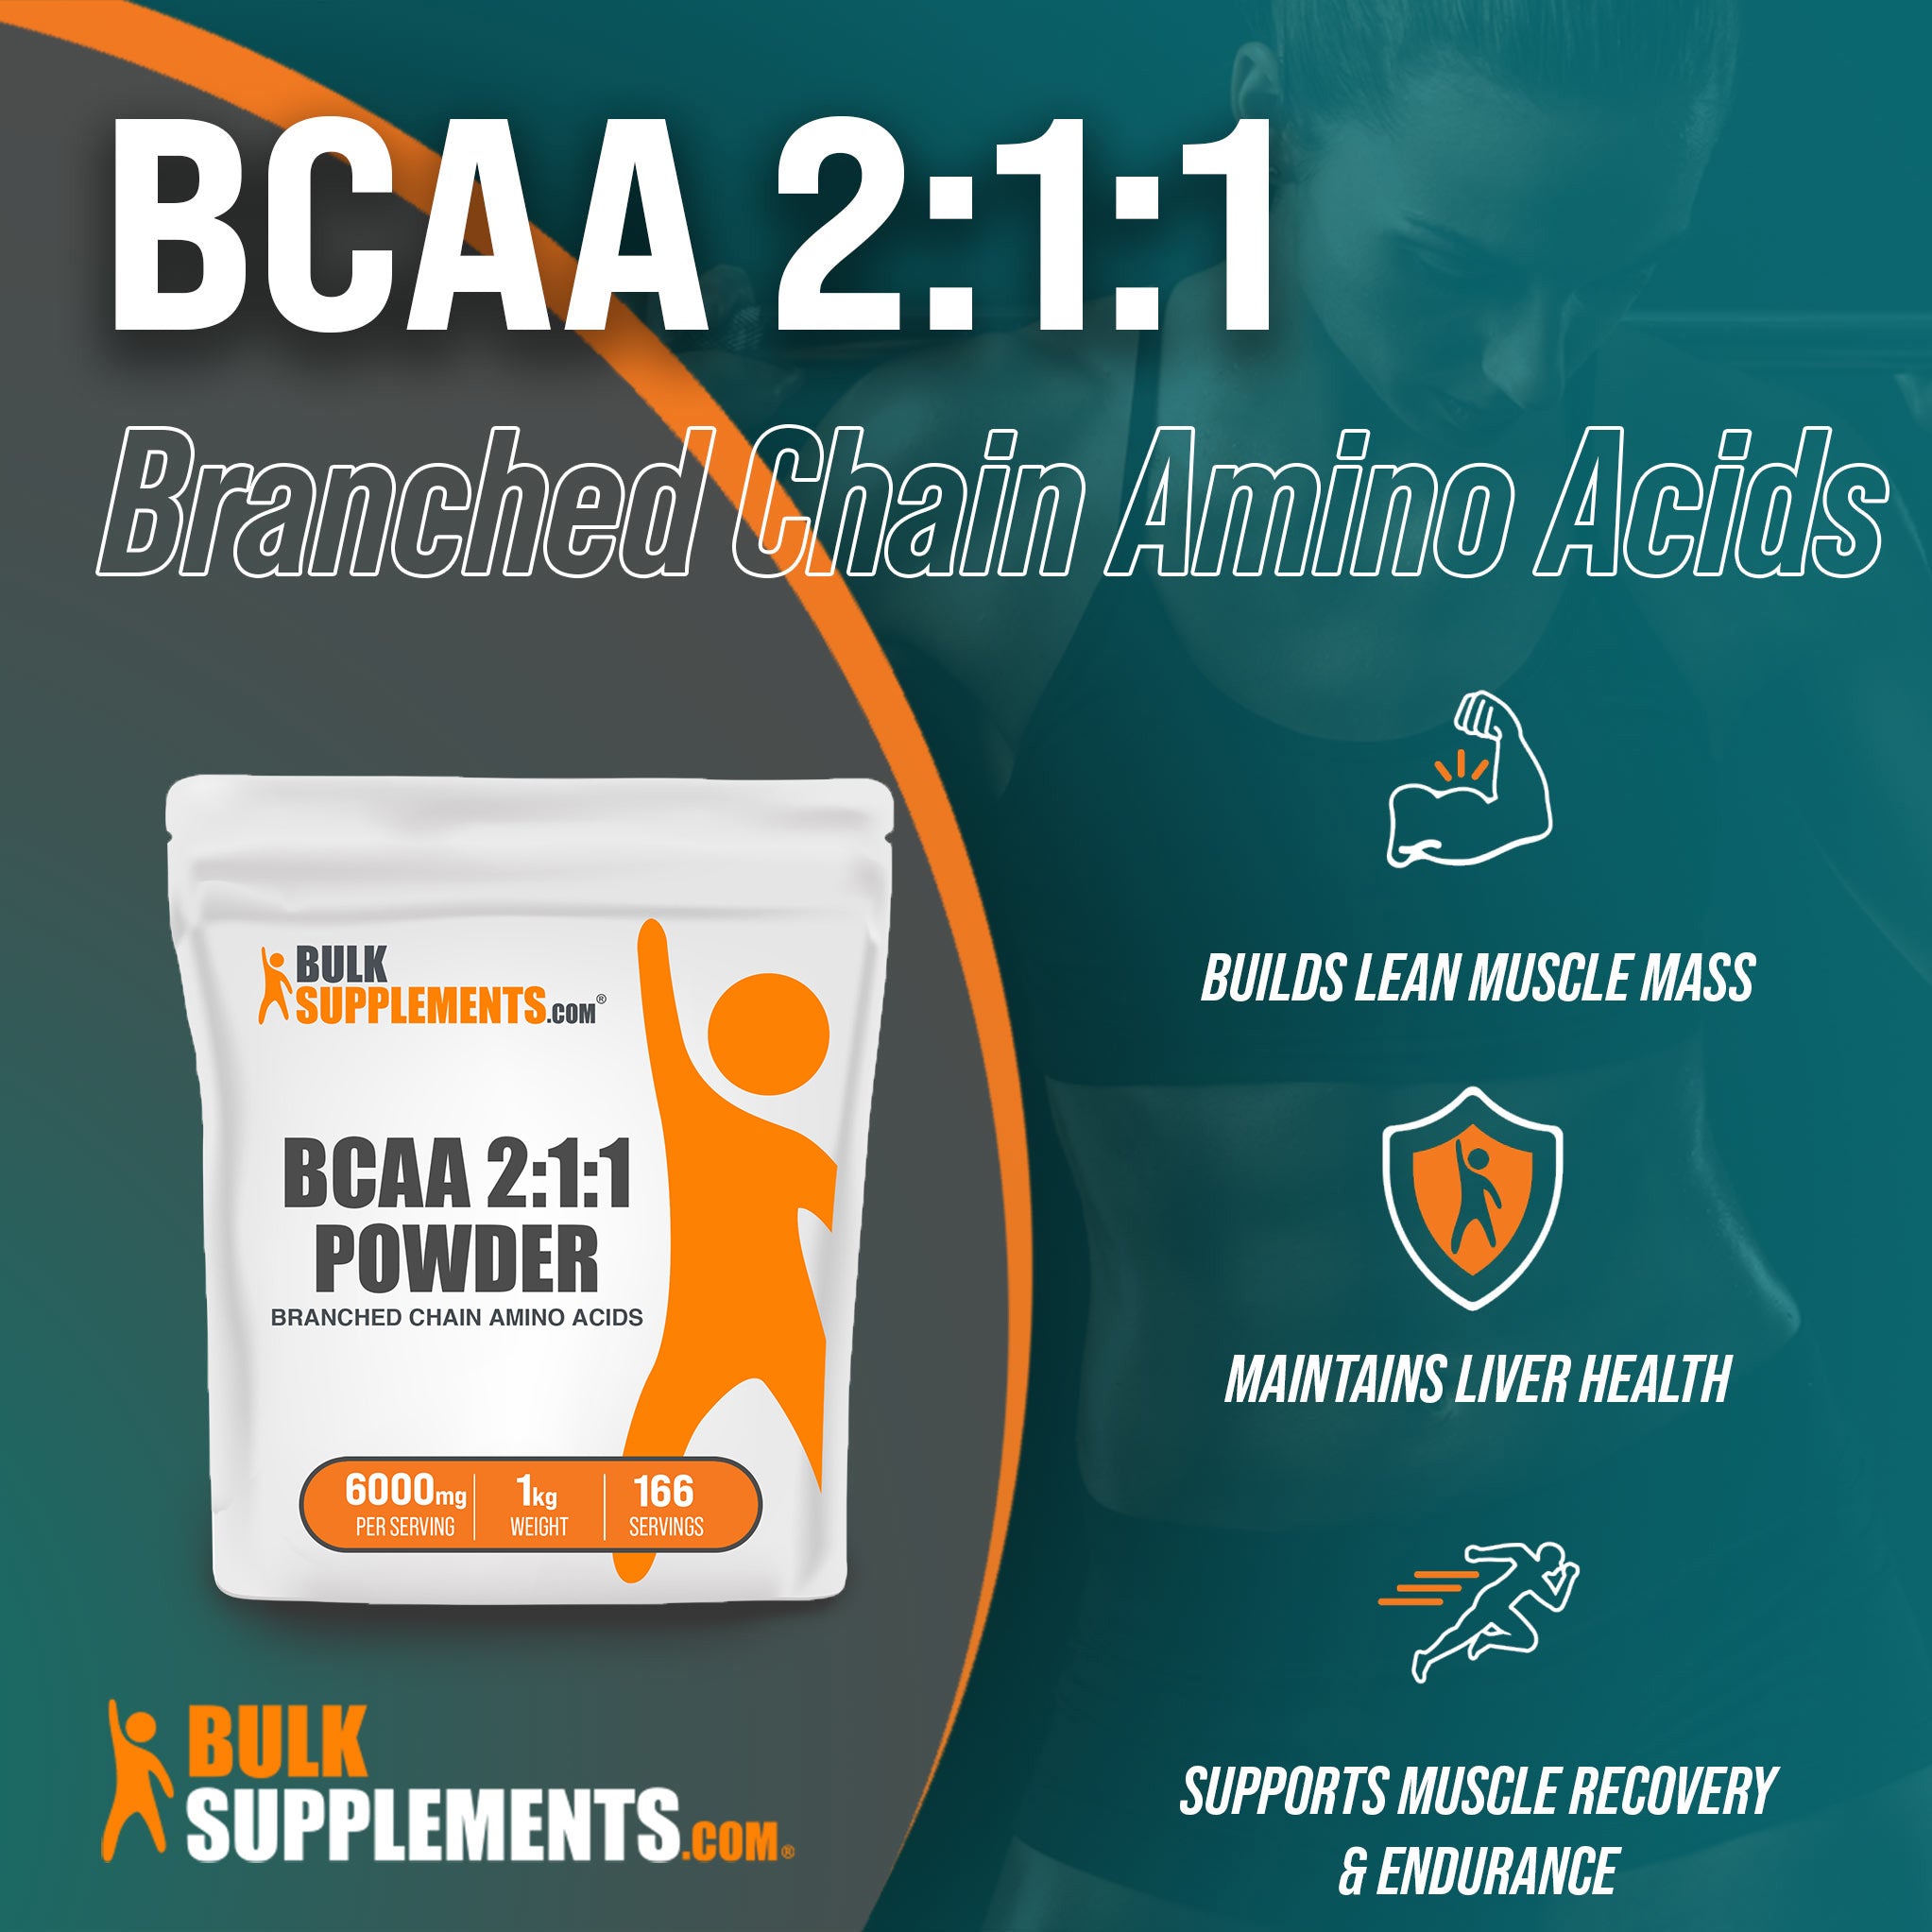 BCAA powder from Bulk Supplements to help build lean muscle mass 